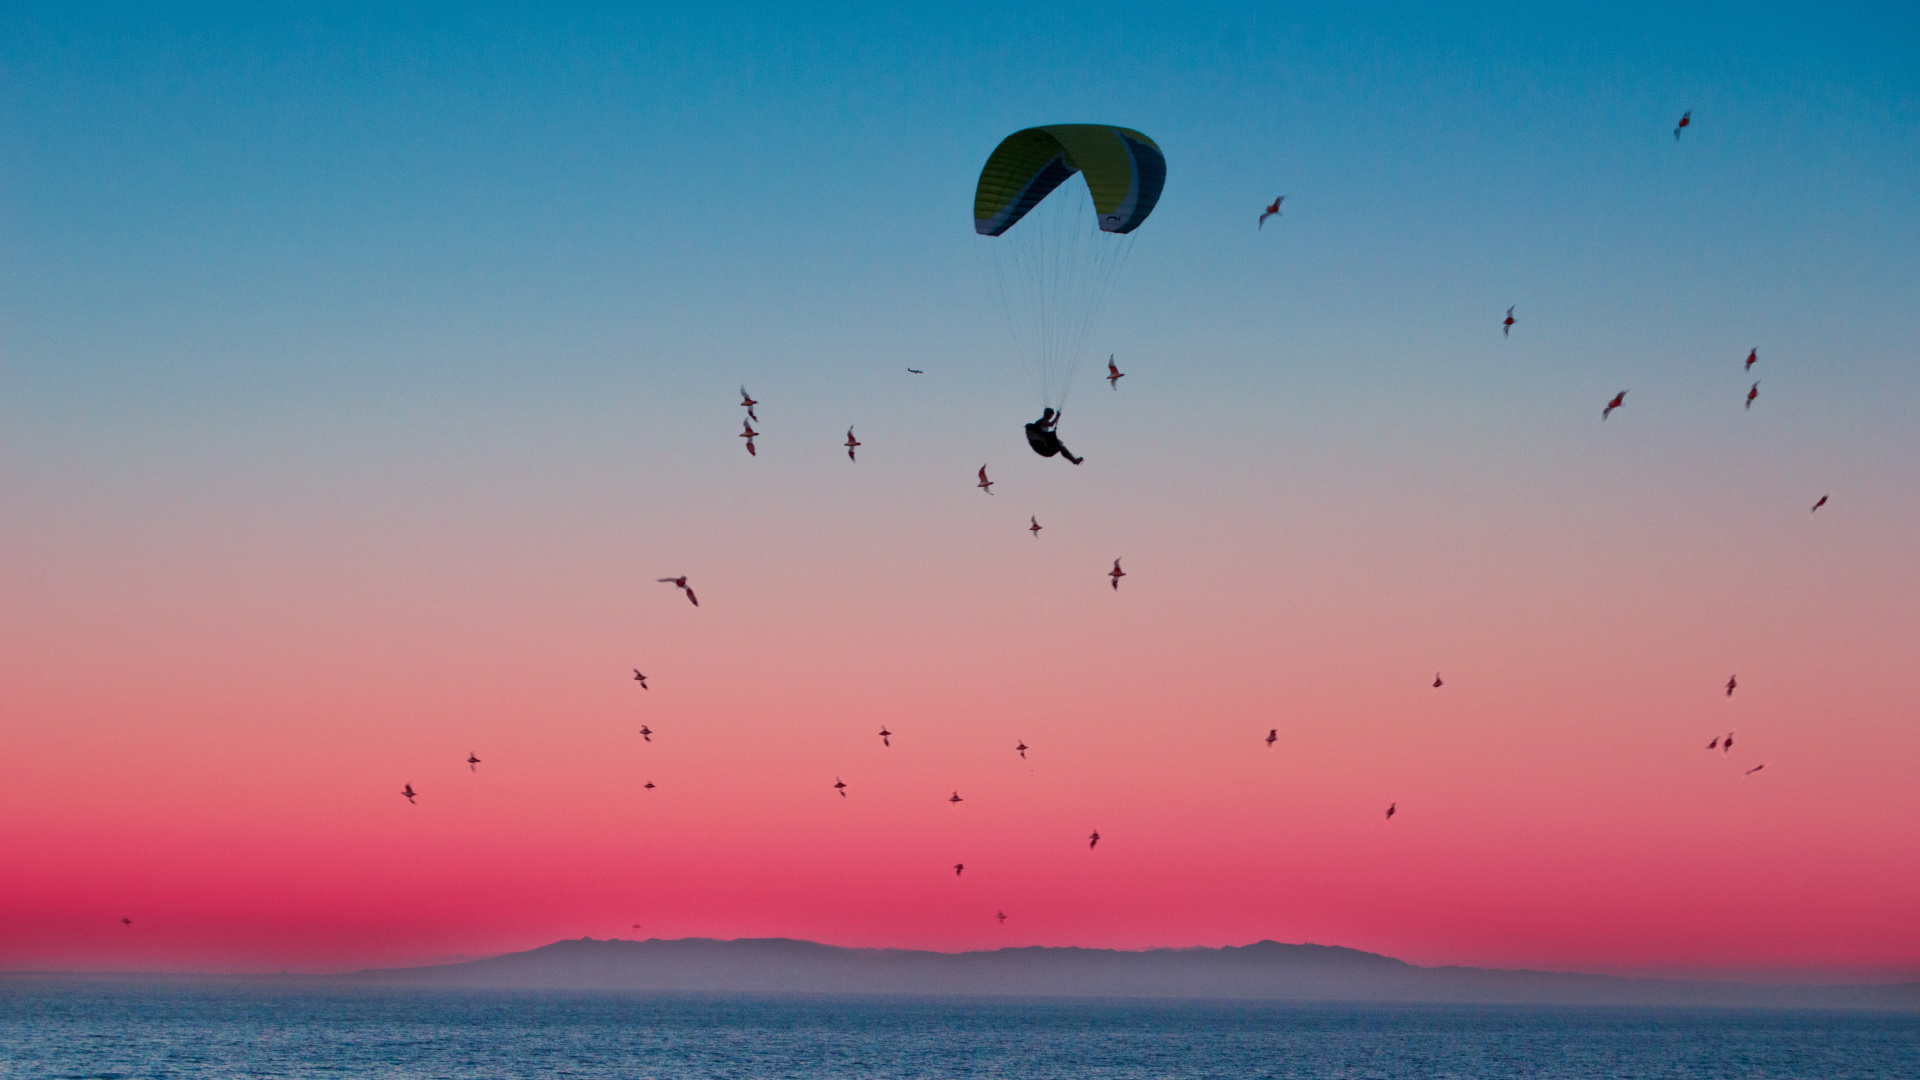 Birds Flying Over The Sea During Sunset. Wallpaper in 1920x1080 Resolution